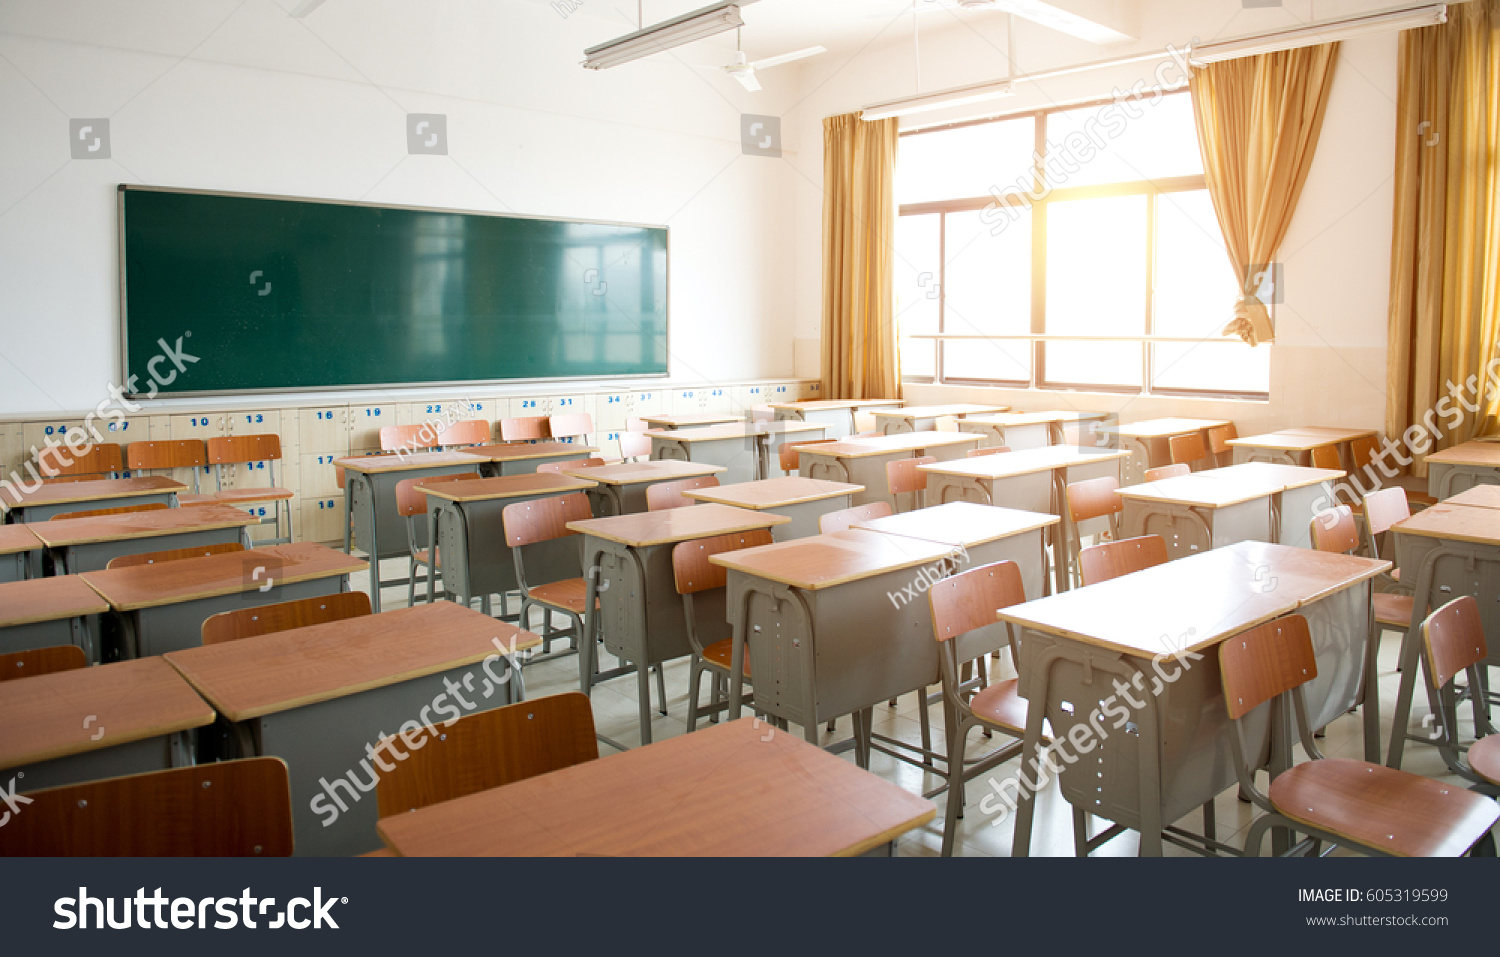 Empty classroom with chairs, desks and chalkboard. #605319599